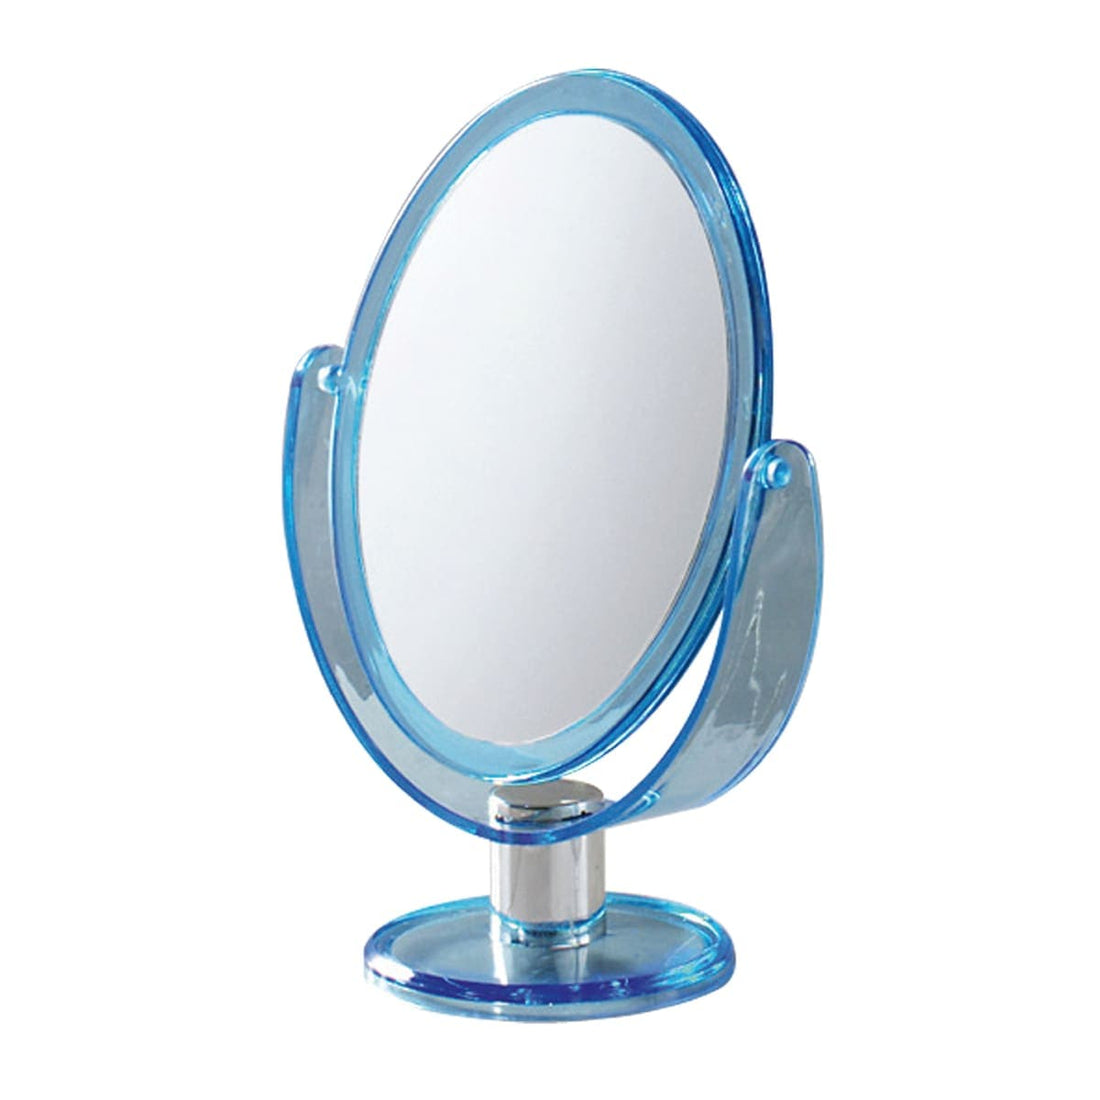 BLUE MAGNIFYING STAND MIRROR - best price from Maltashopper.com BR430996099